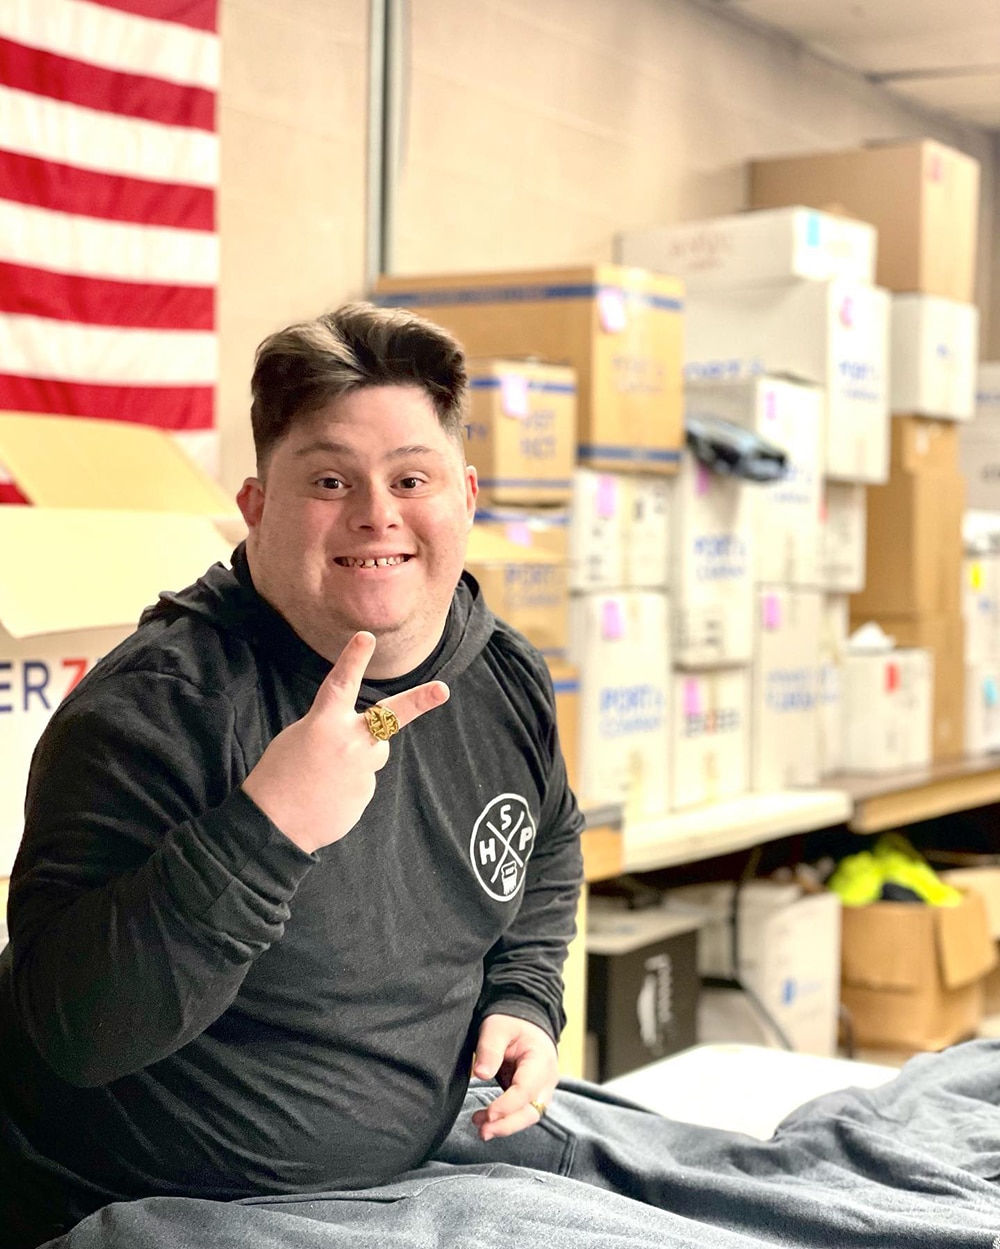 Screen Printer Finds Good Help in Man with Down Syndrome